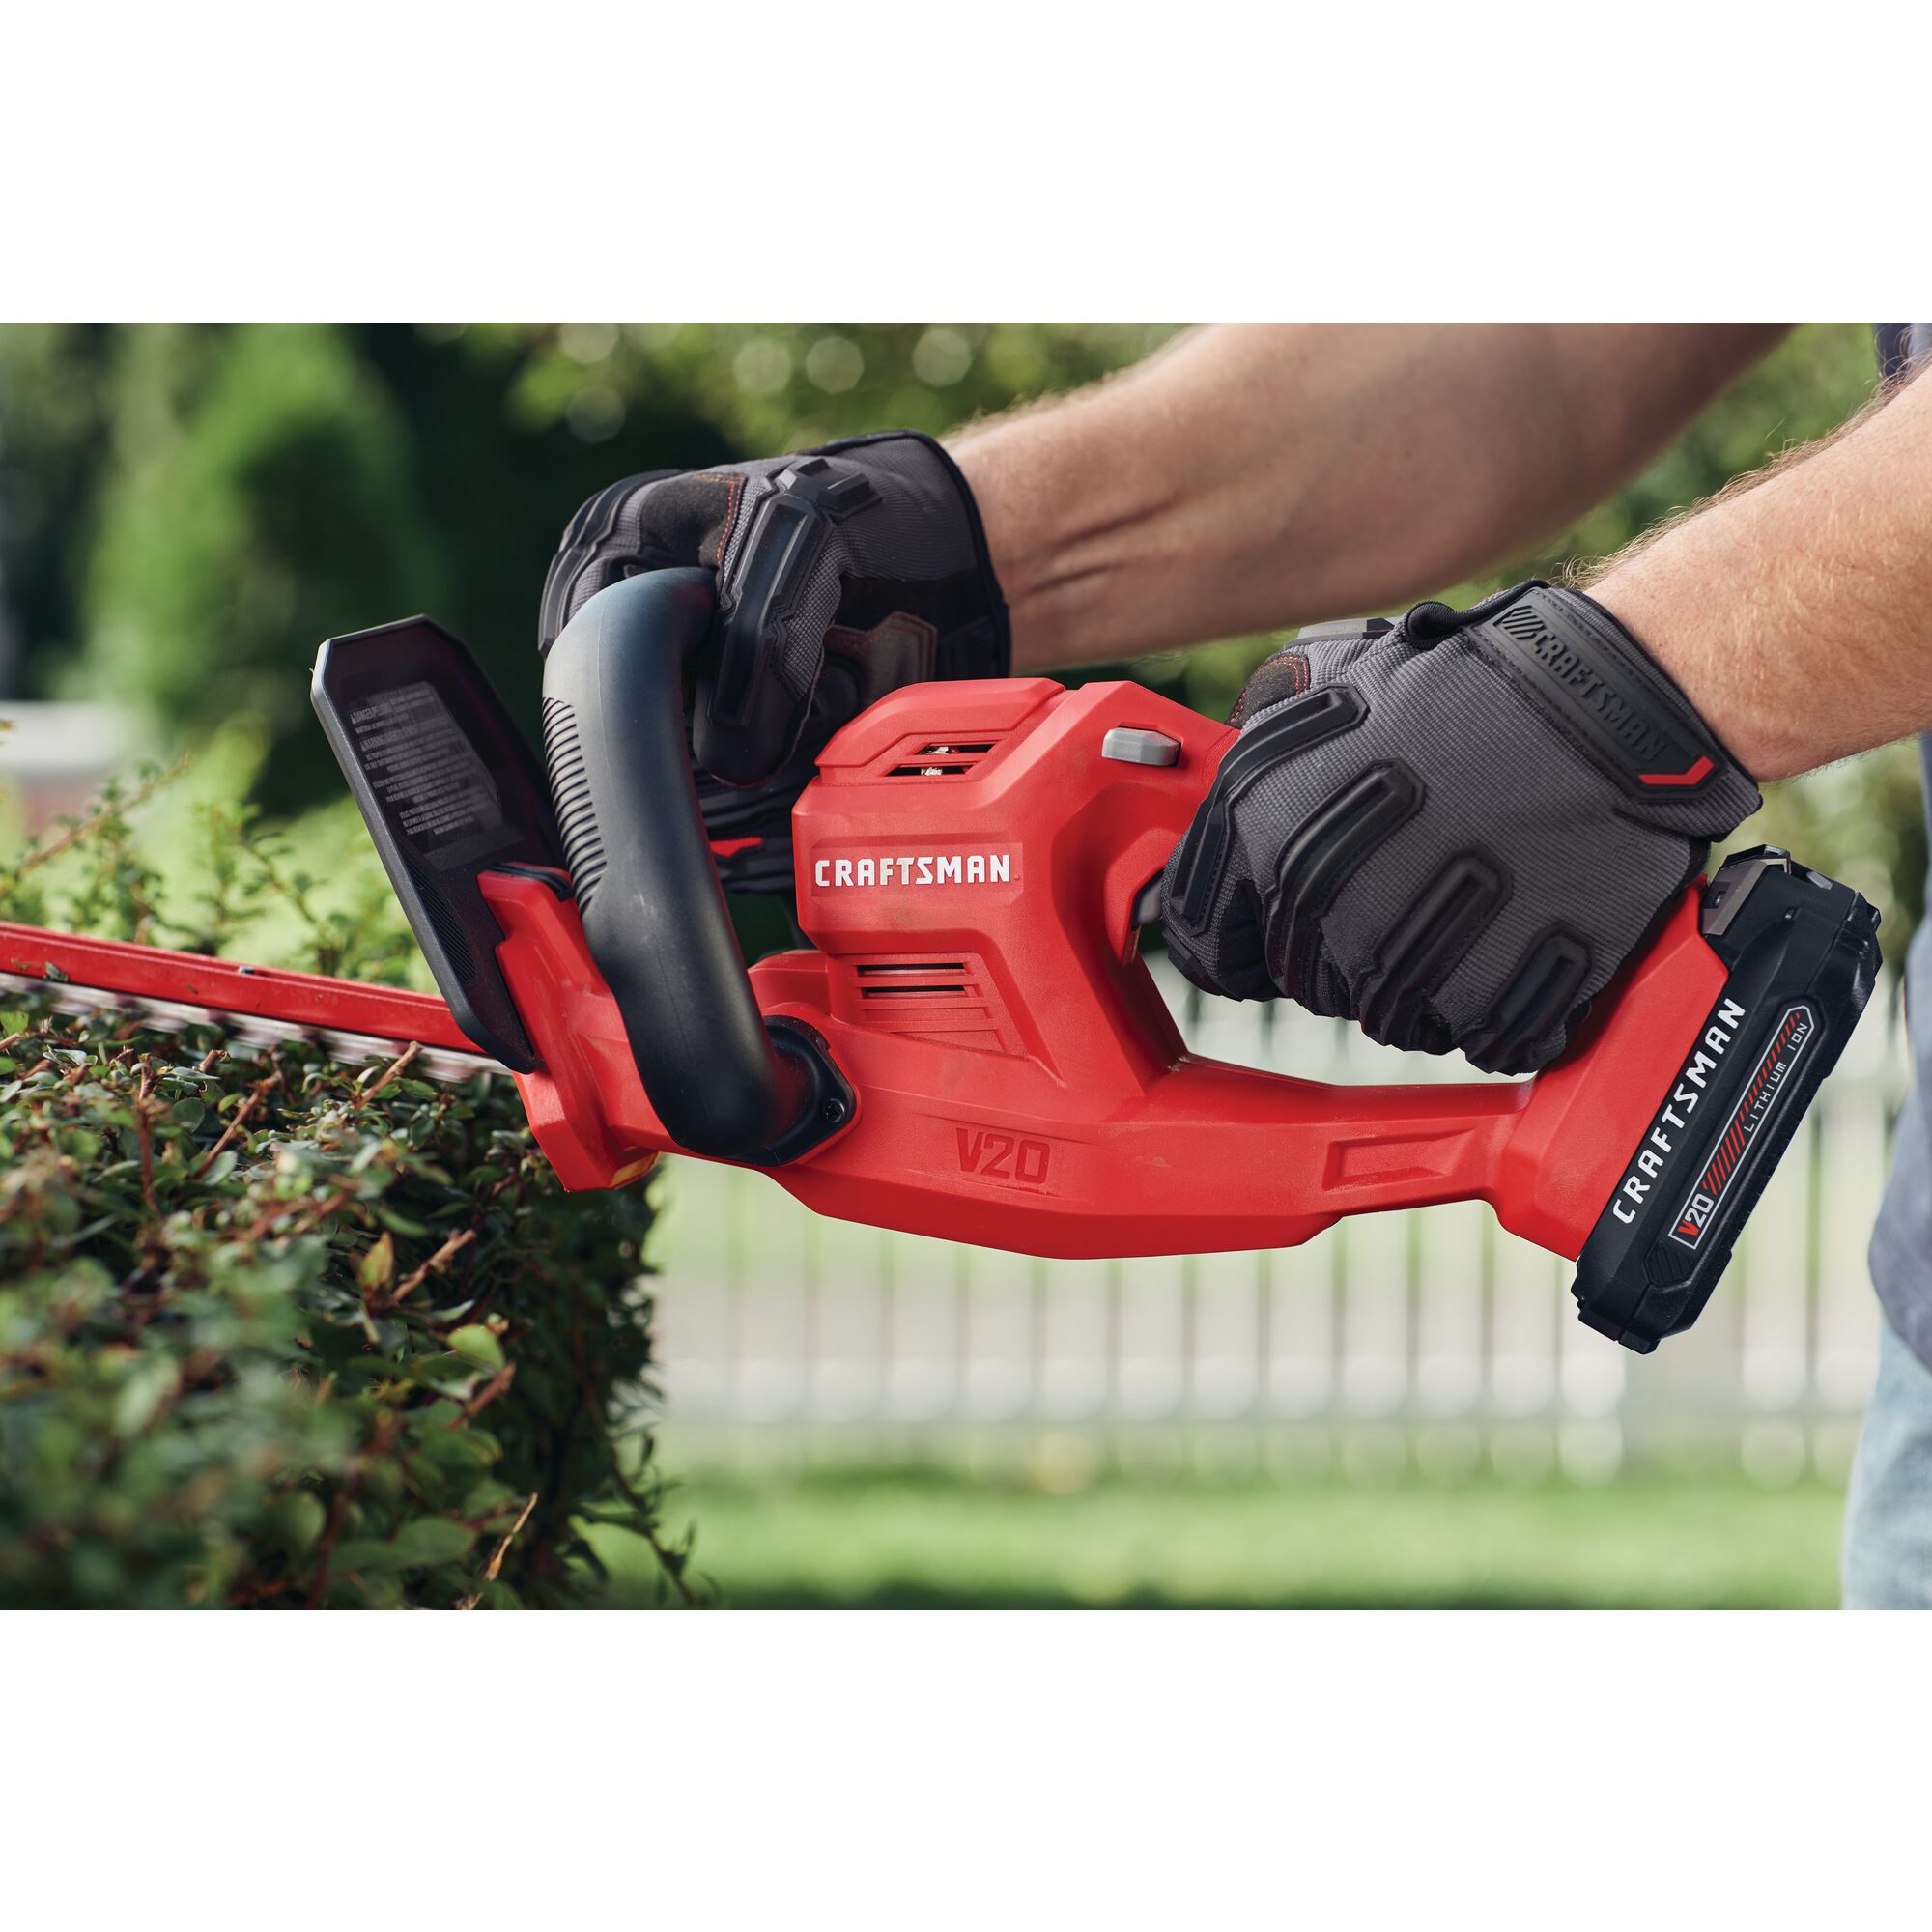 View of CRAFTSMAN Hedge Trimmers highlighting product features